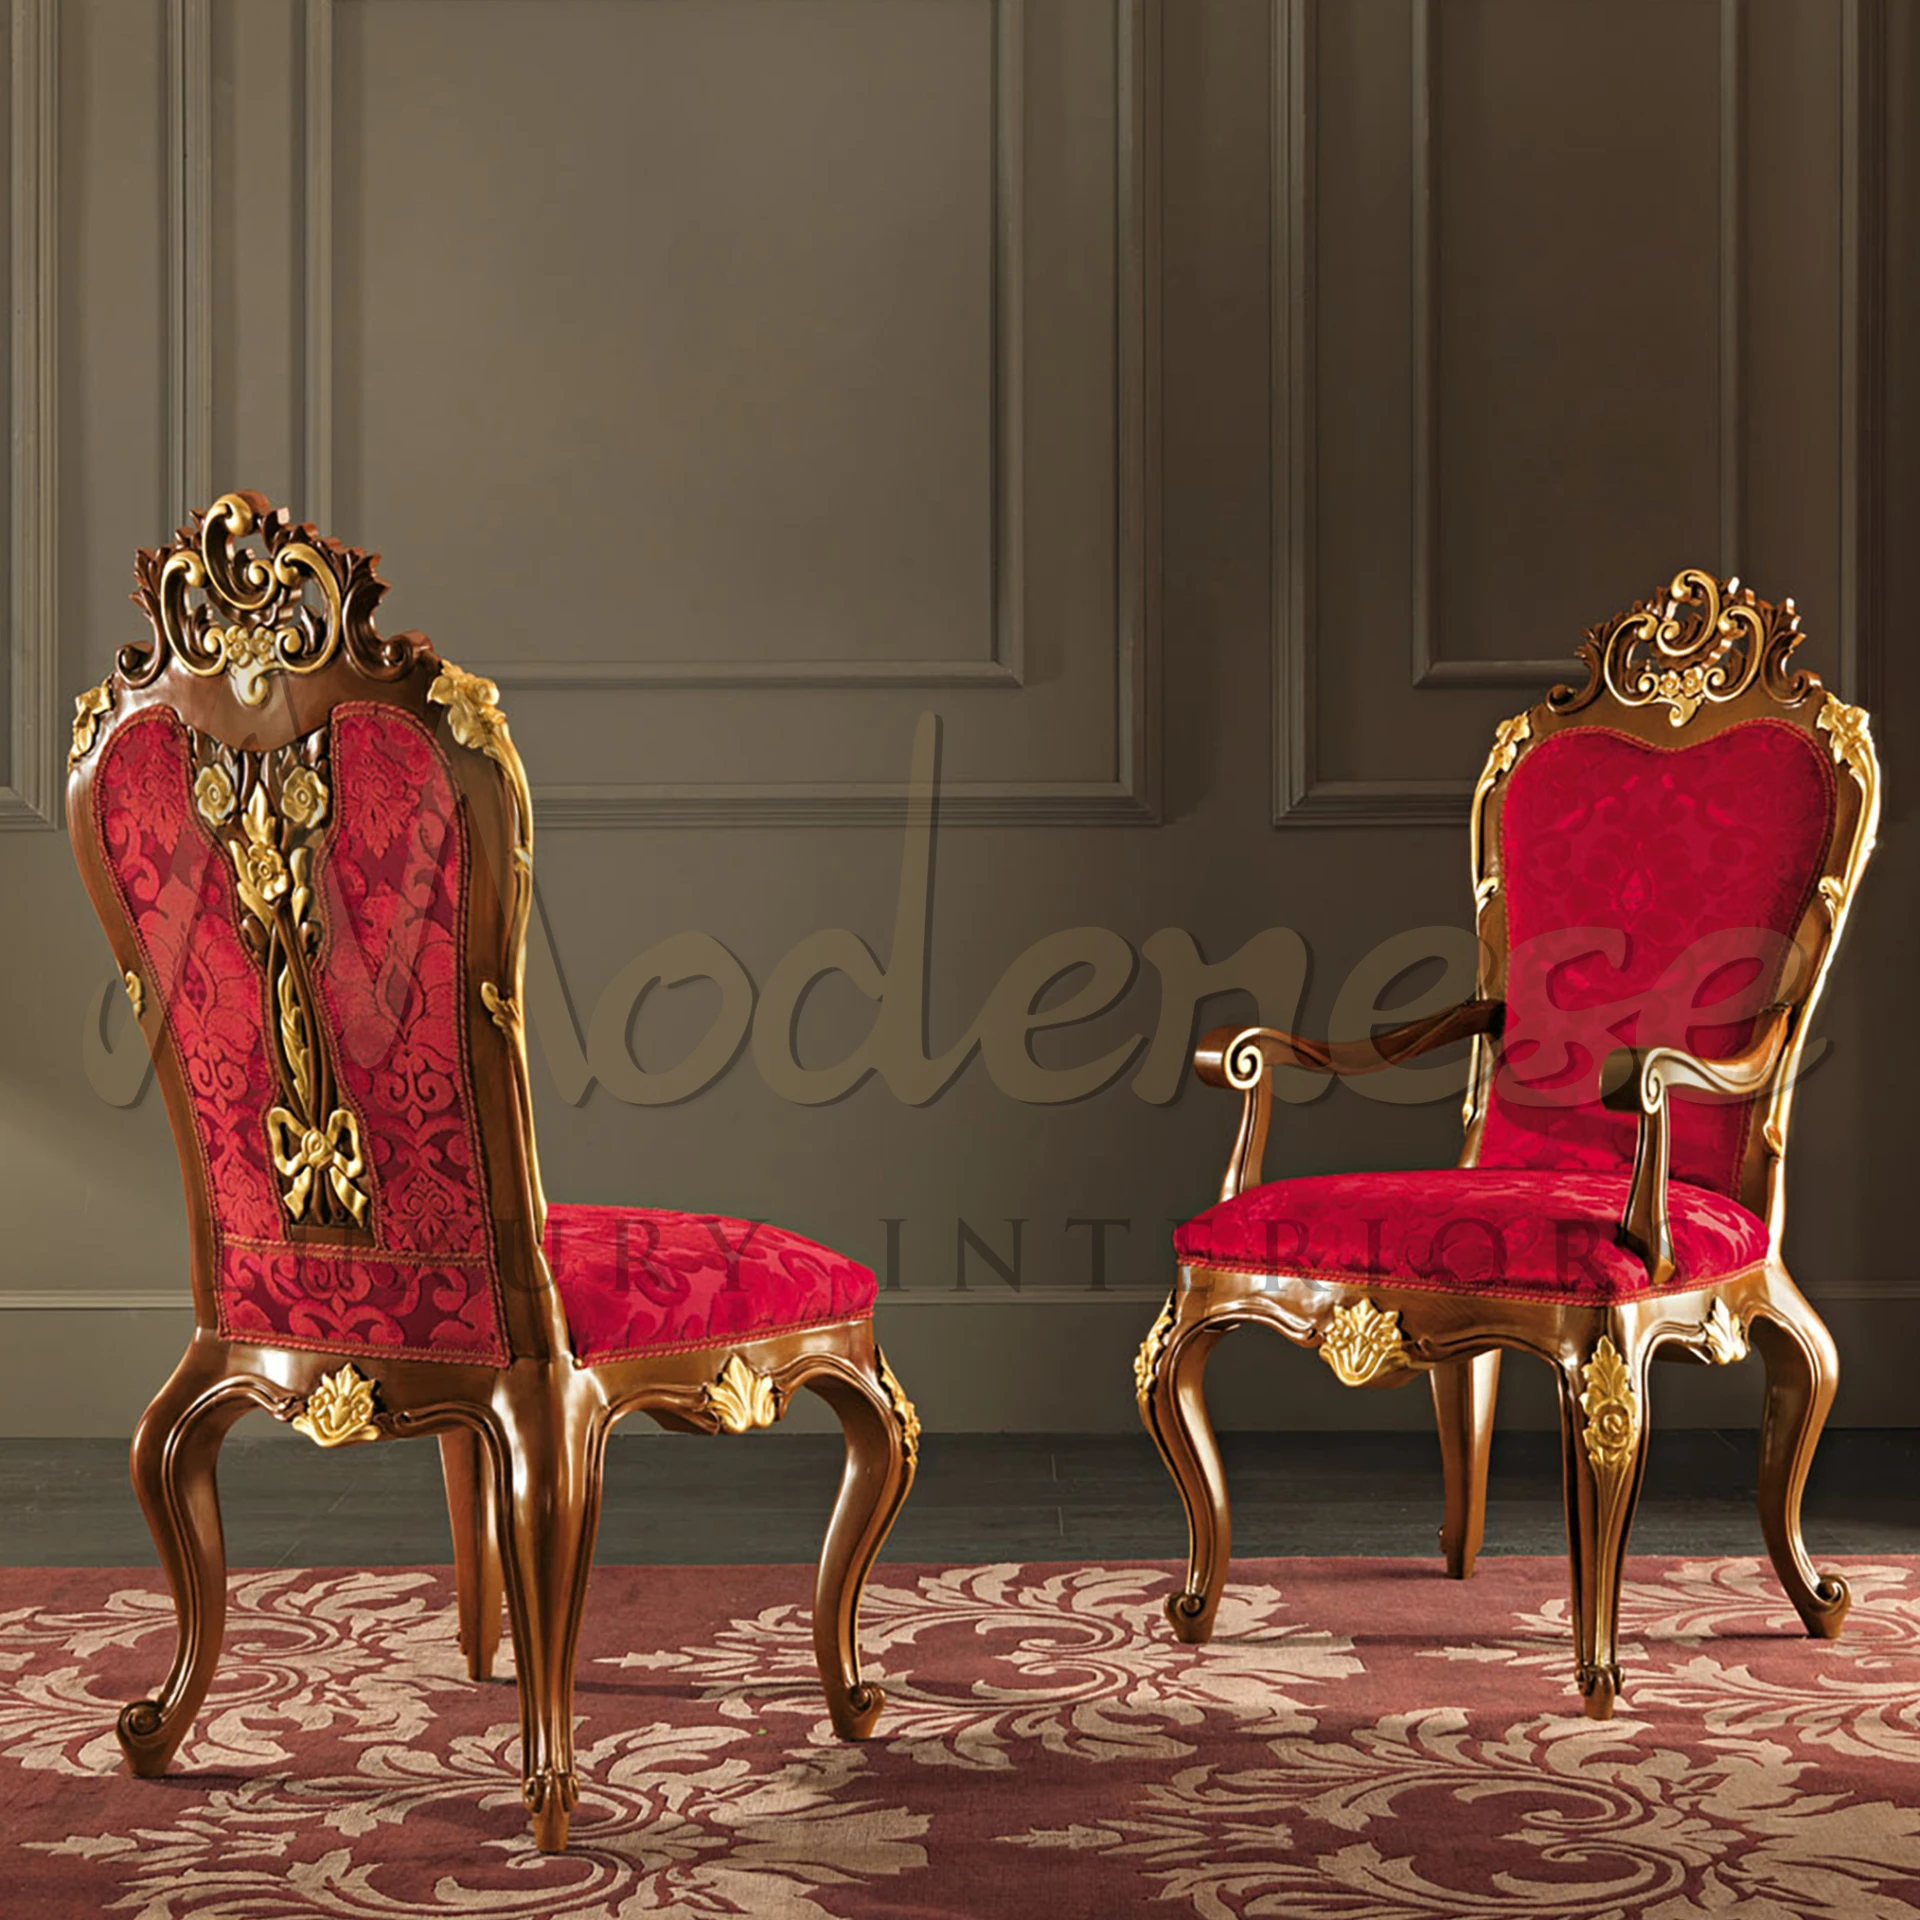 Experience your living space with this luxurious chair by Modenese Furniture, boasting flamboyant upholstery and elegant gold leaf carvings.